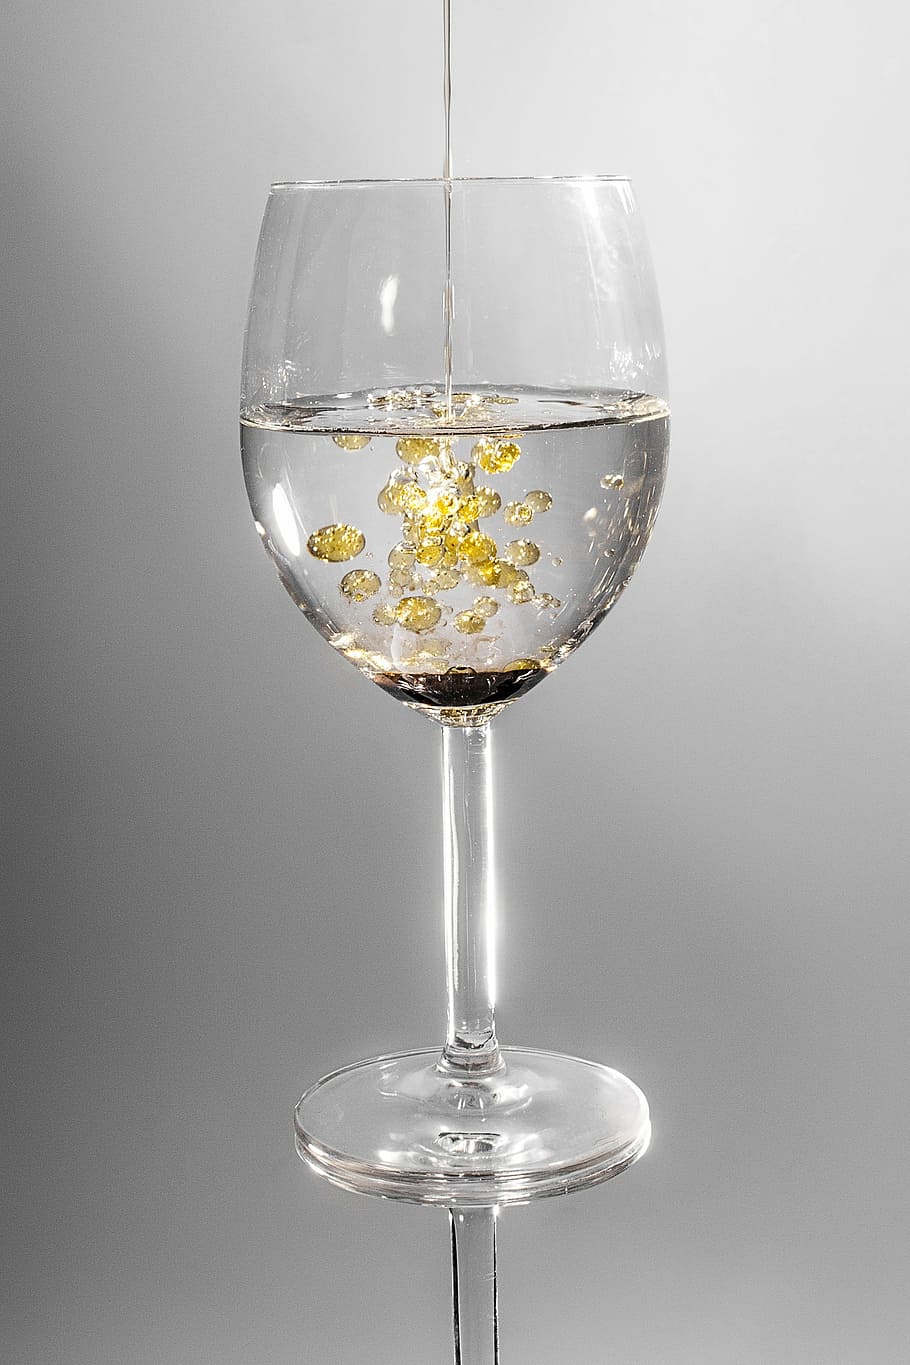 clear, wine glass, filled, yellow, liquid, glass, crystal glass, drink, oil, drip